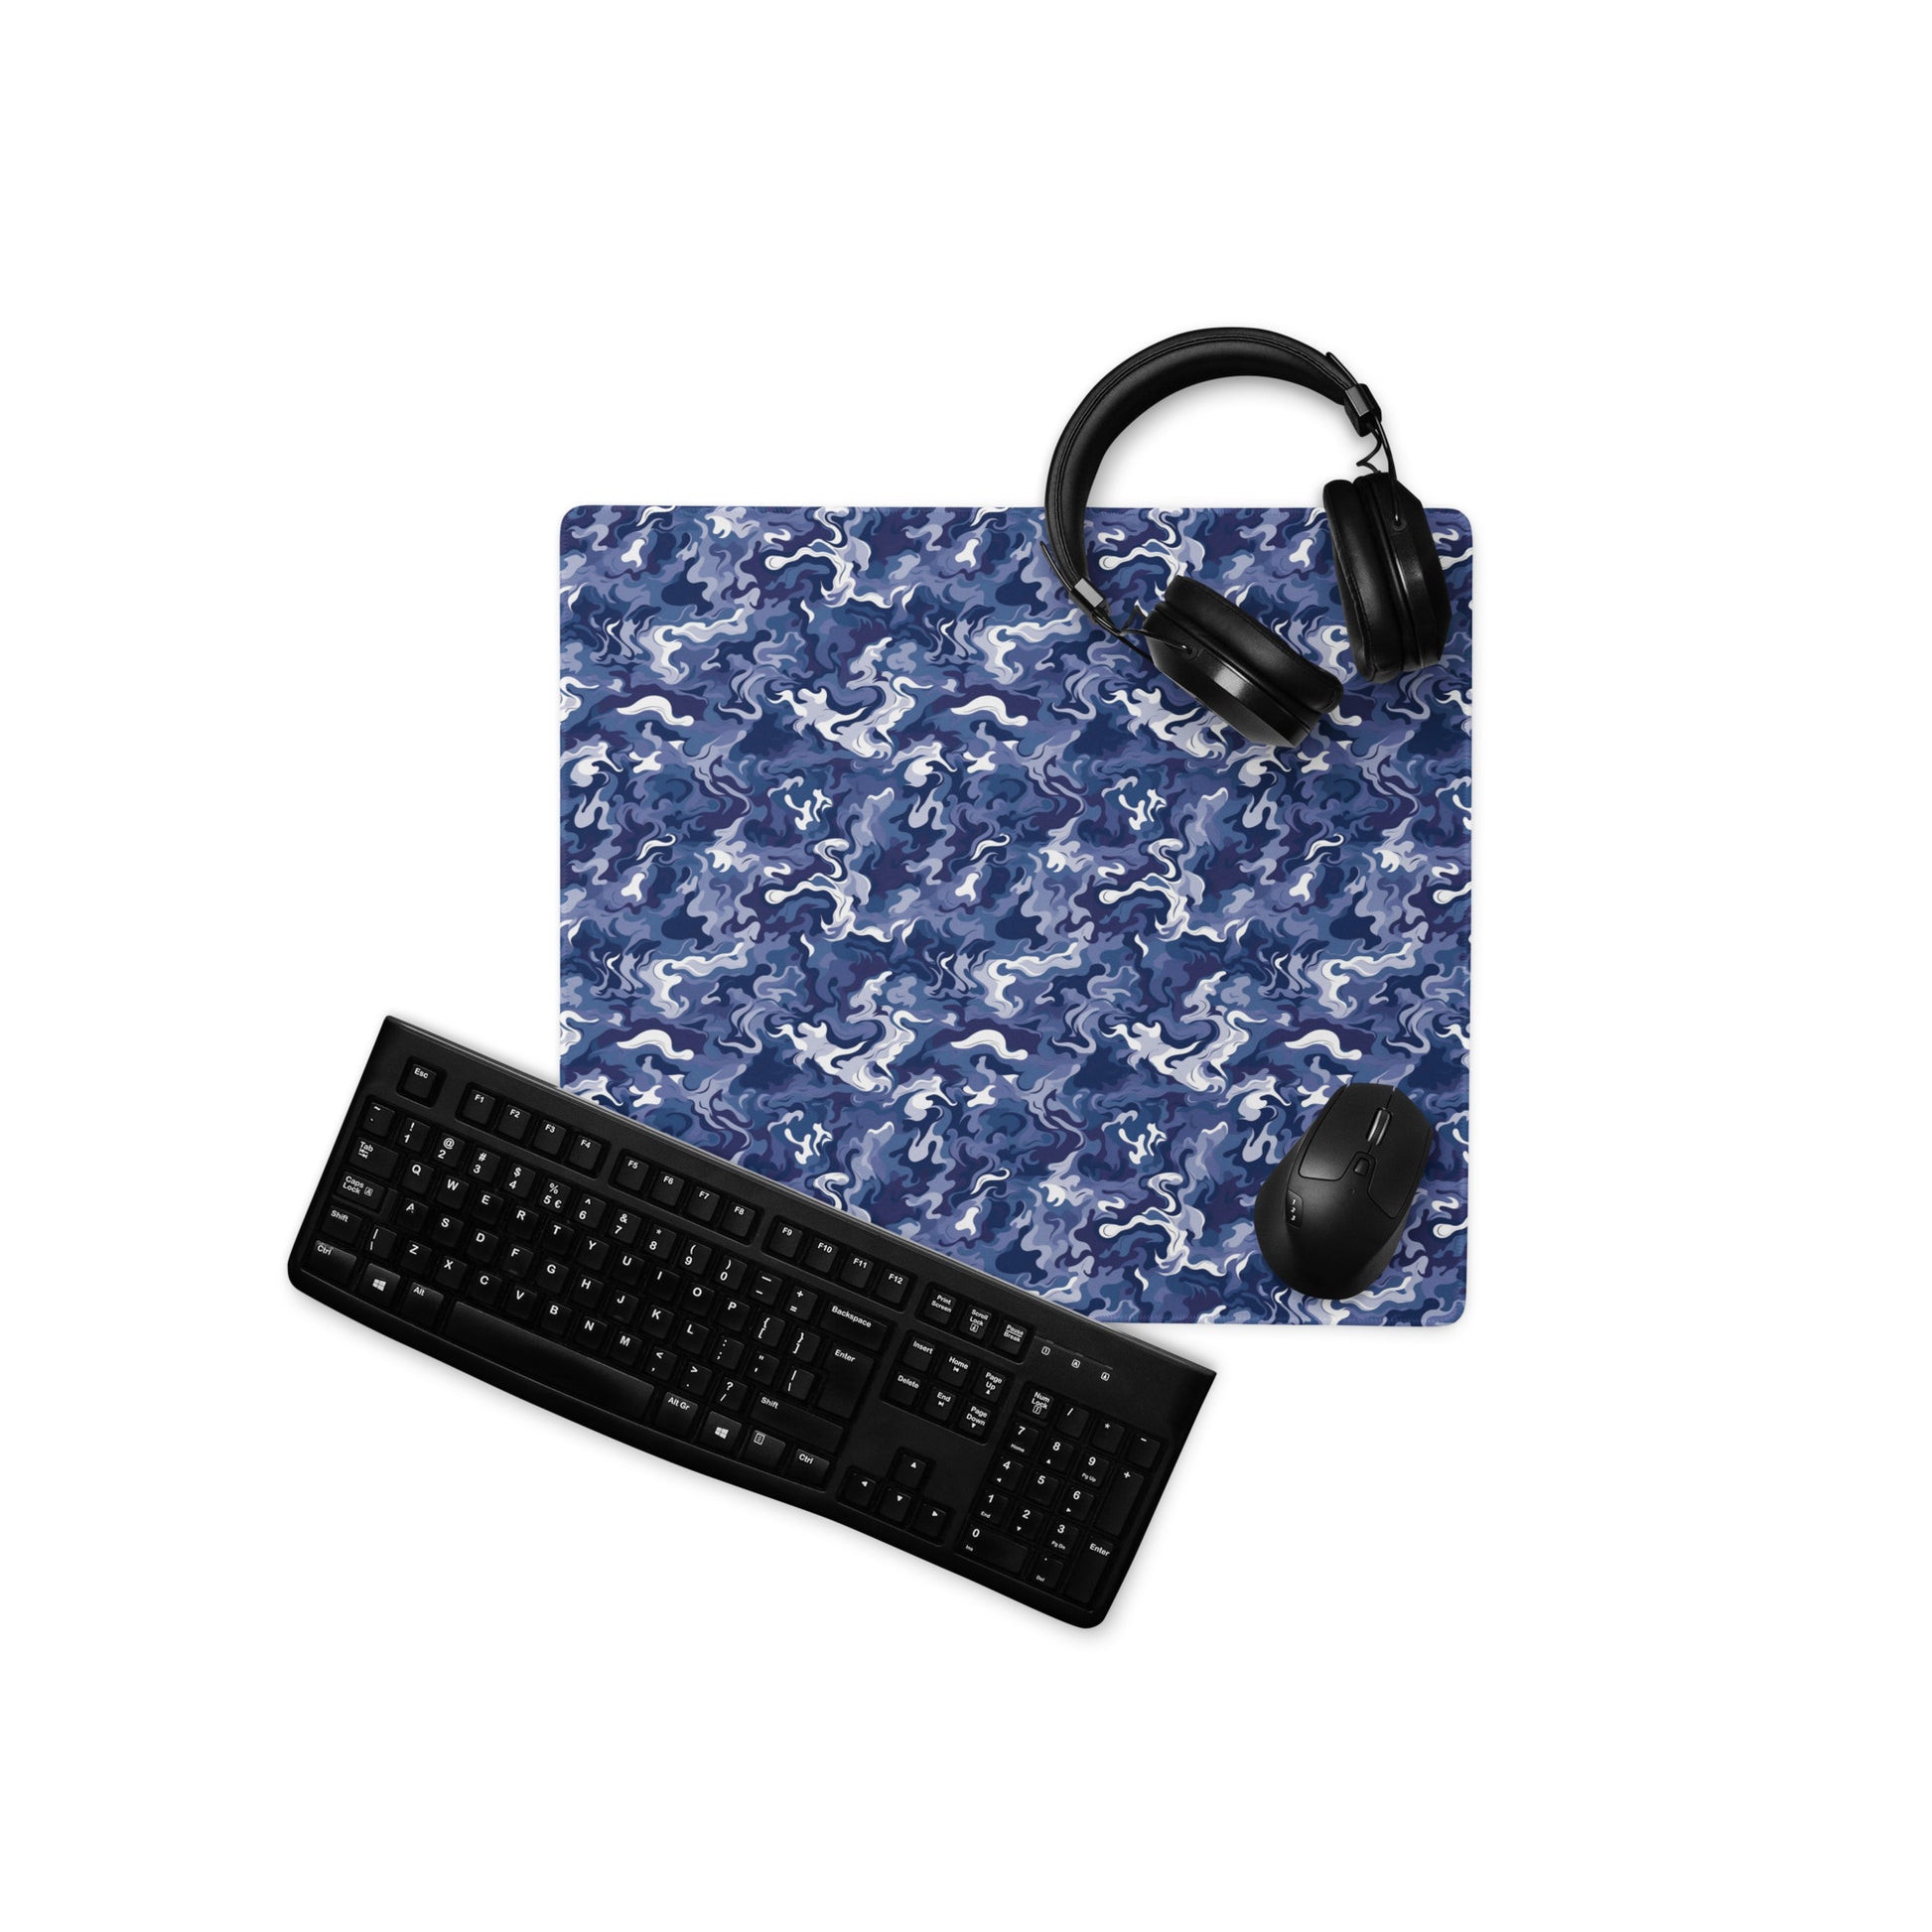 A 18" x 16" desk pad with a royal blue and white camo pattern. With a keyboard, mouse, and headphones sitting on it.